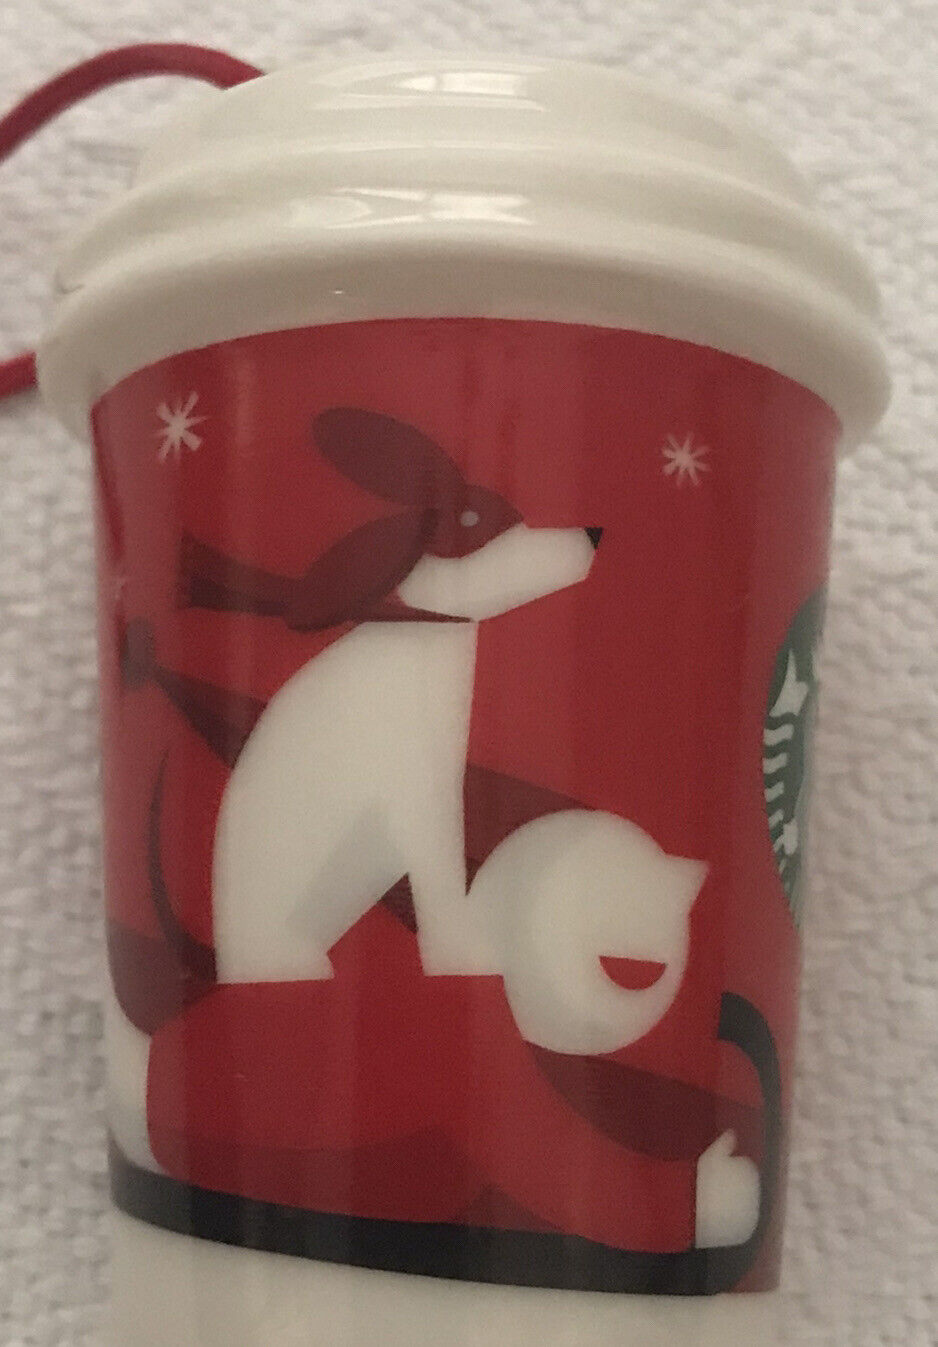 Starbucks Holiday Christmas Ornament 2011 Limited Edition Boy and Dog with Sled